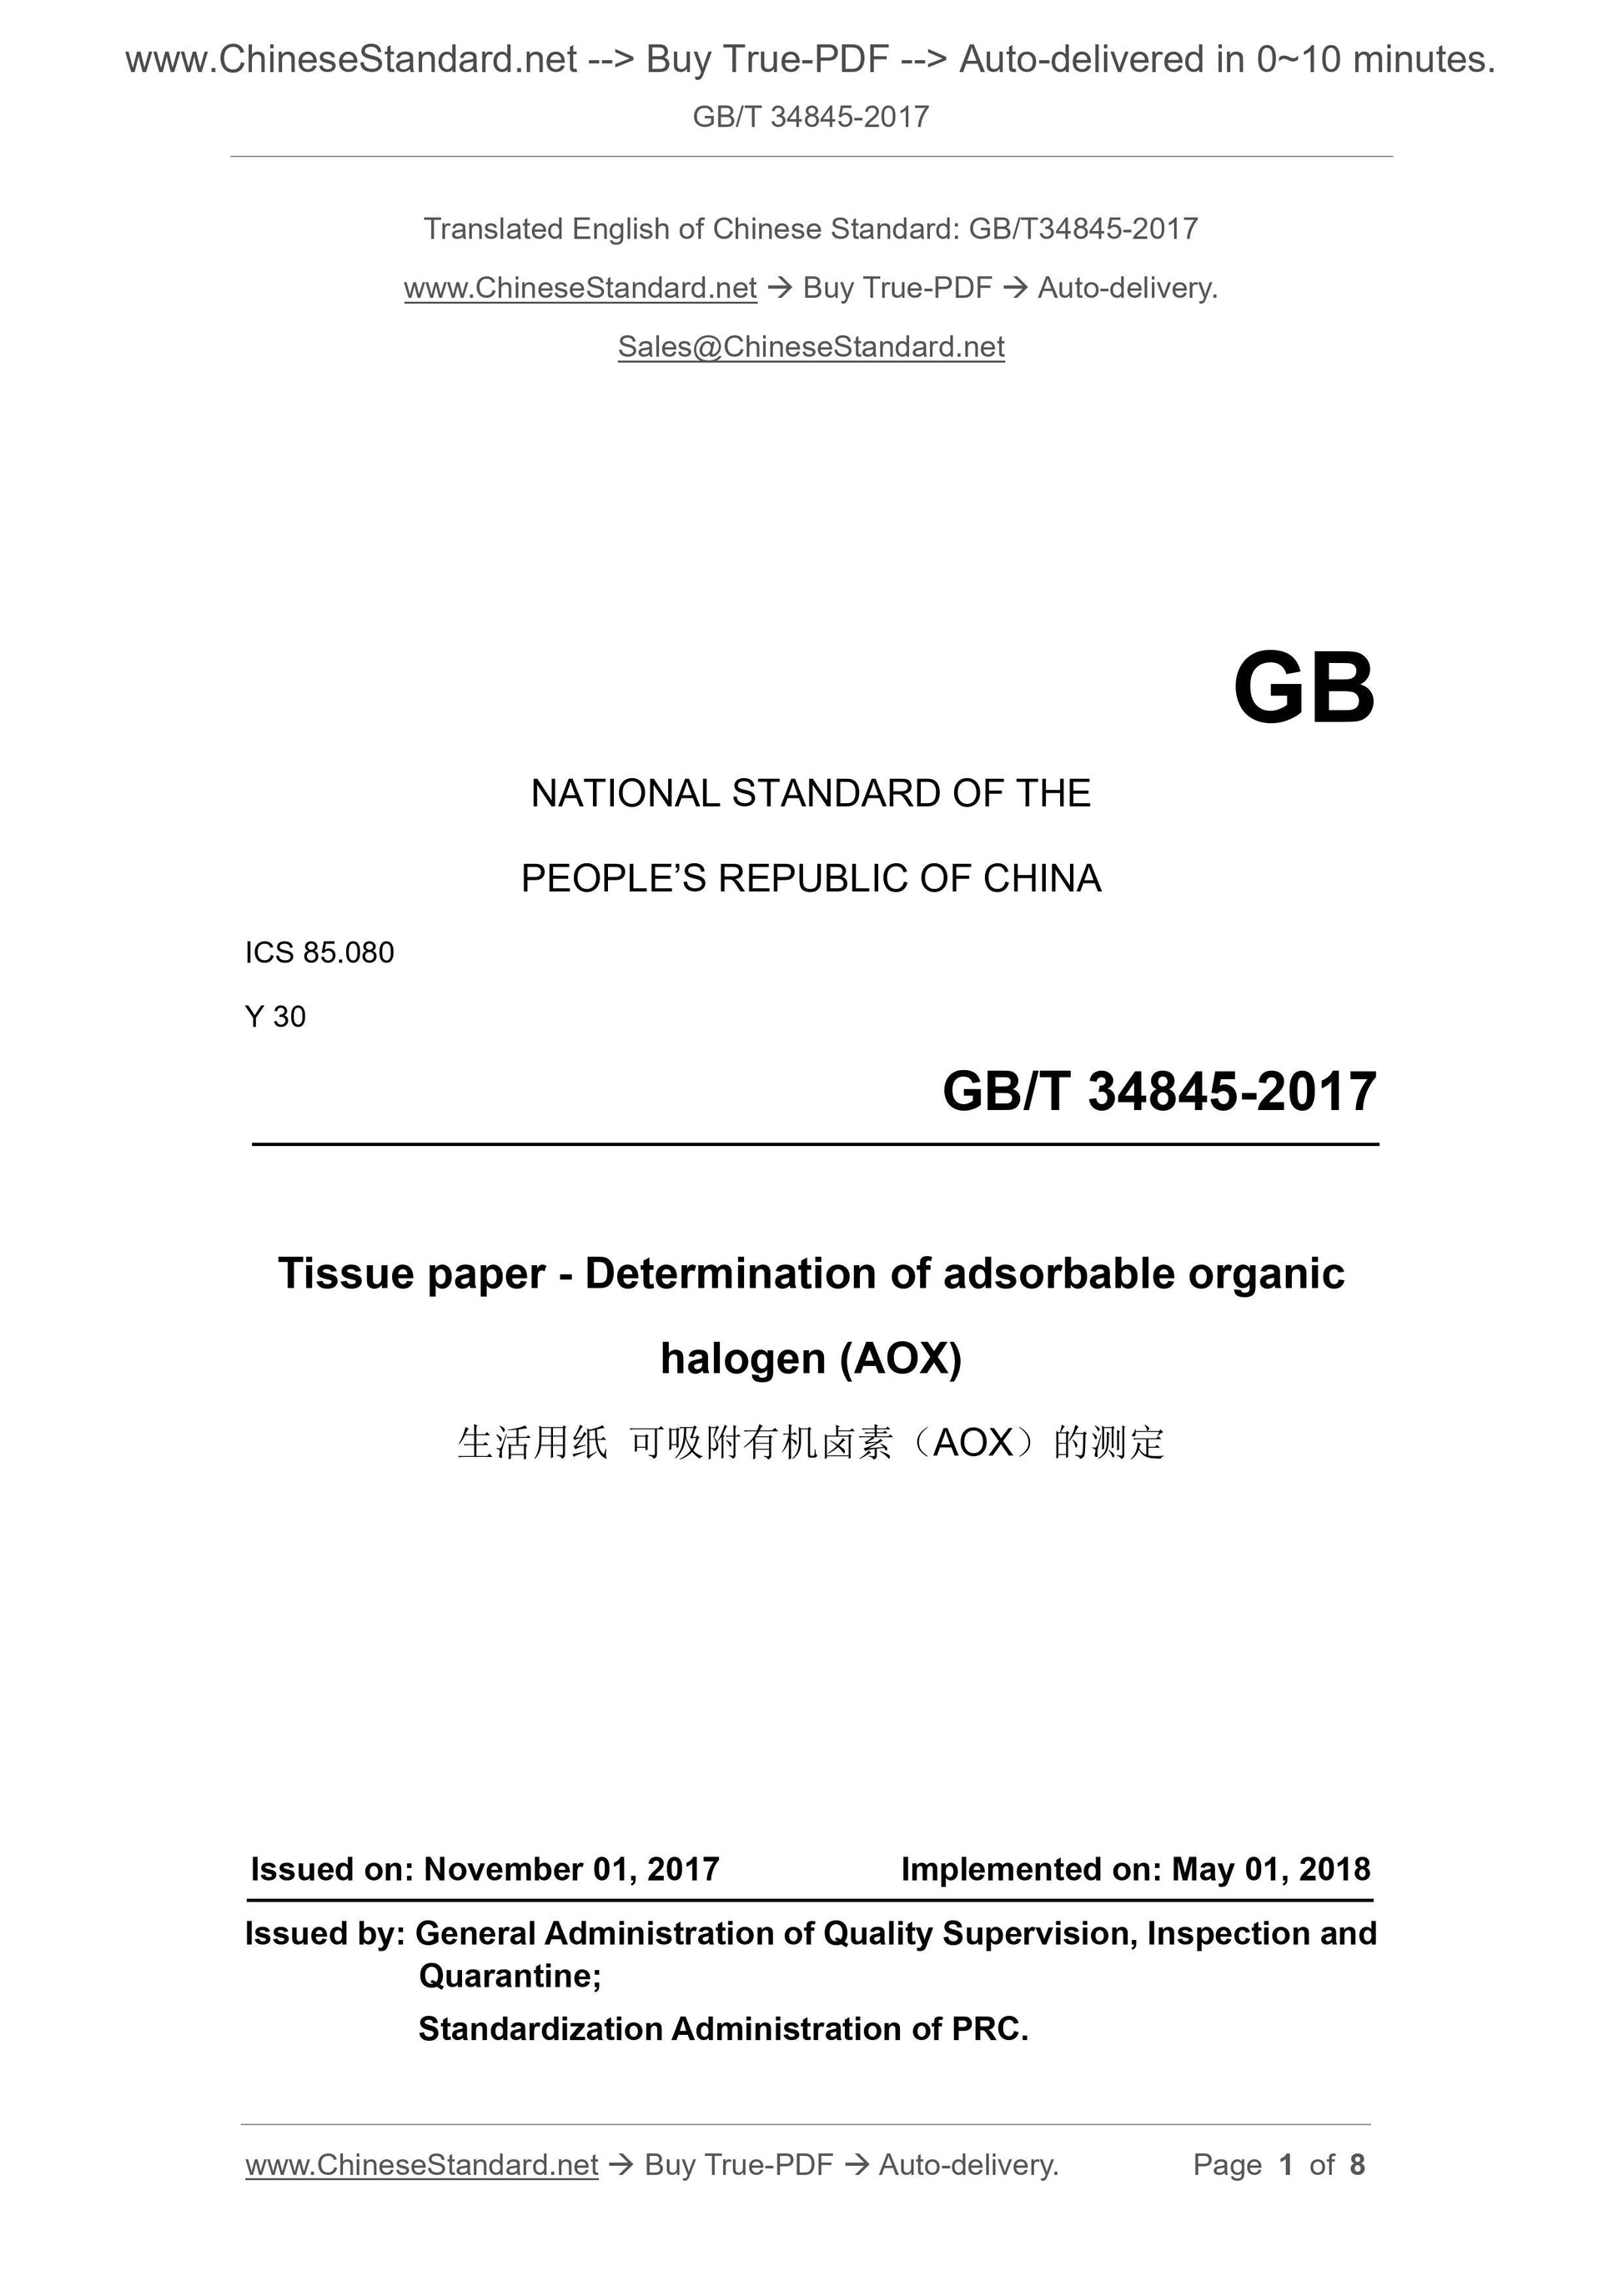 GB/T 34845-2017 Page 1